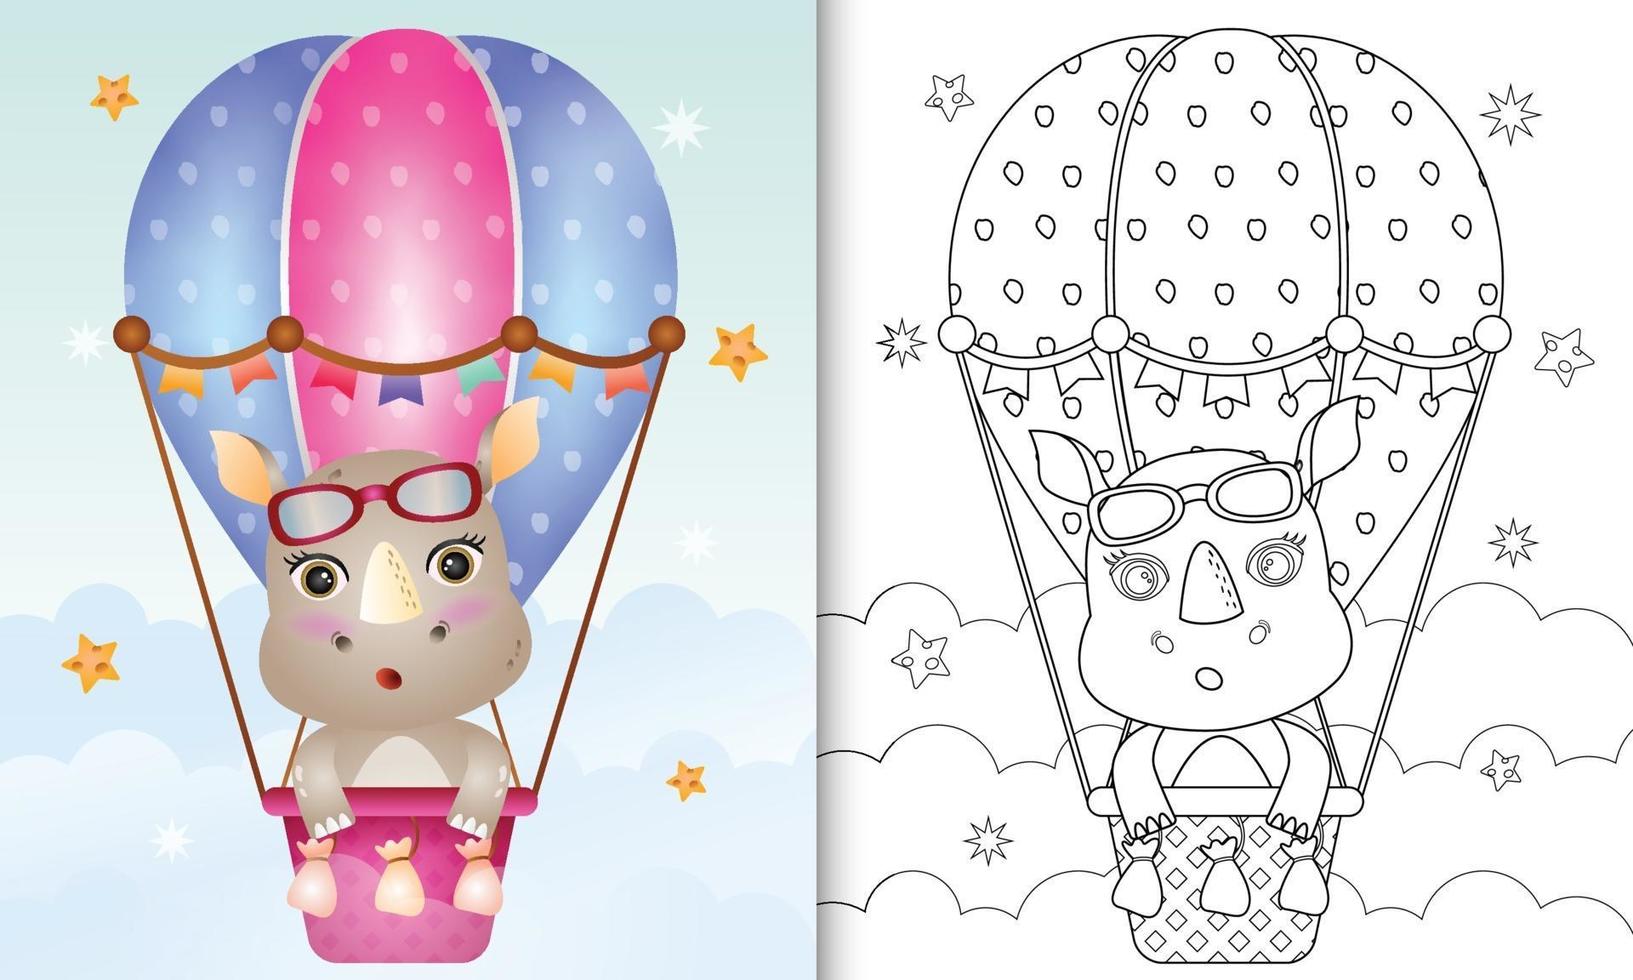 coloring book for kids with a cute rhino on hot air balloon vector